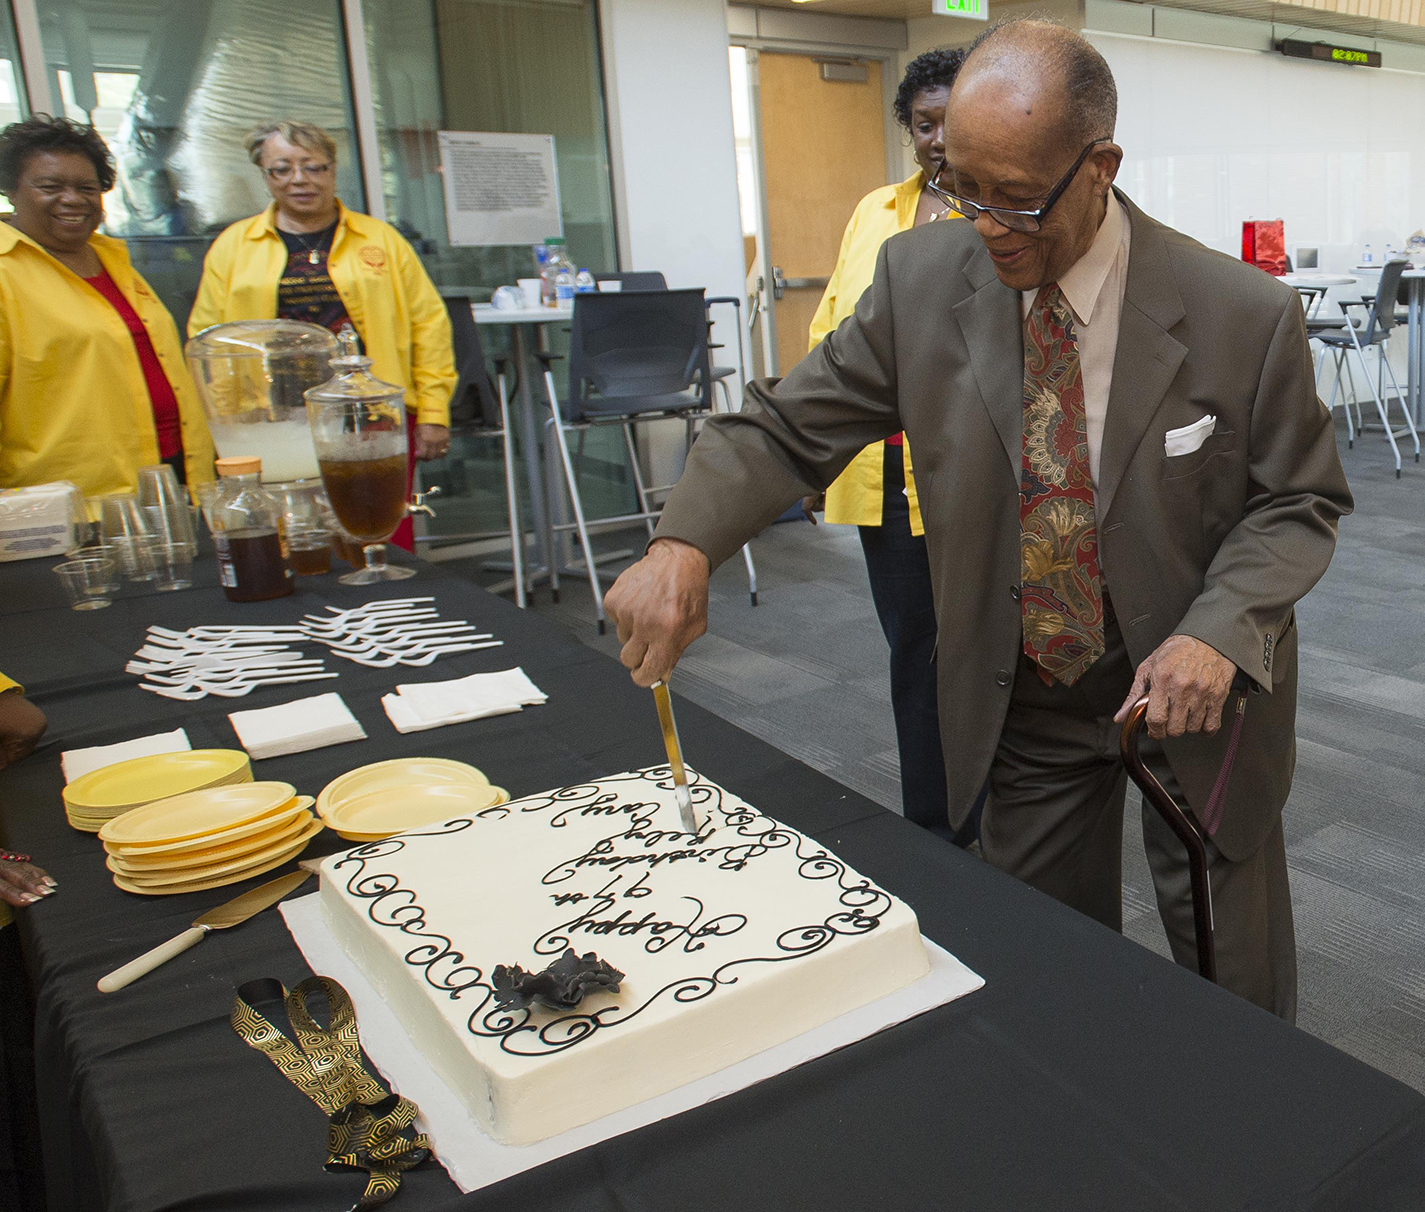 After speaking with attendees, former South professor Reby Cary cuts the cake to honor his 97th birthday Sept. 9.